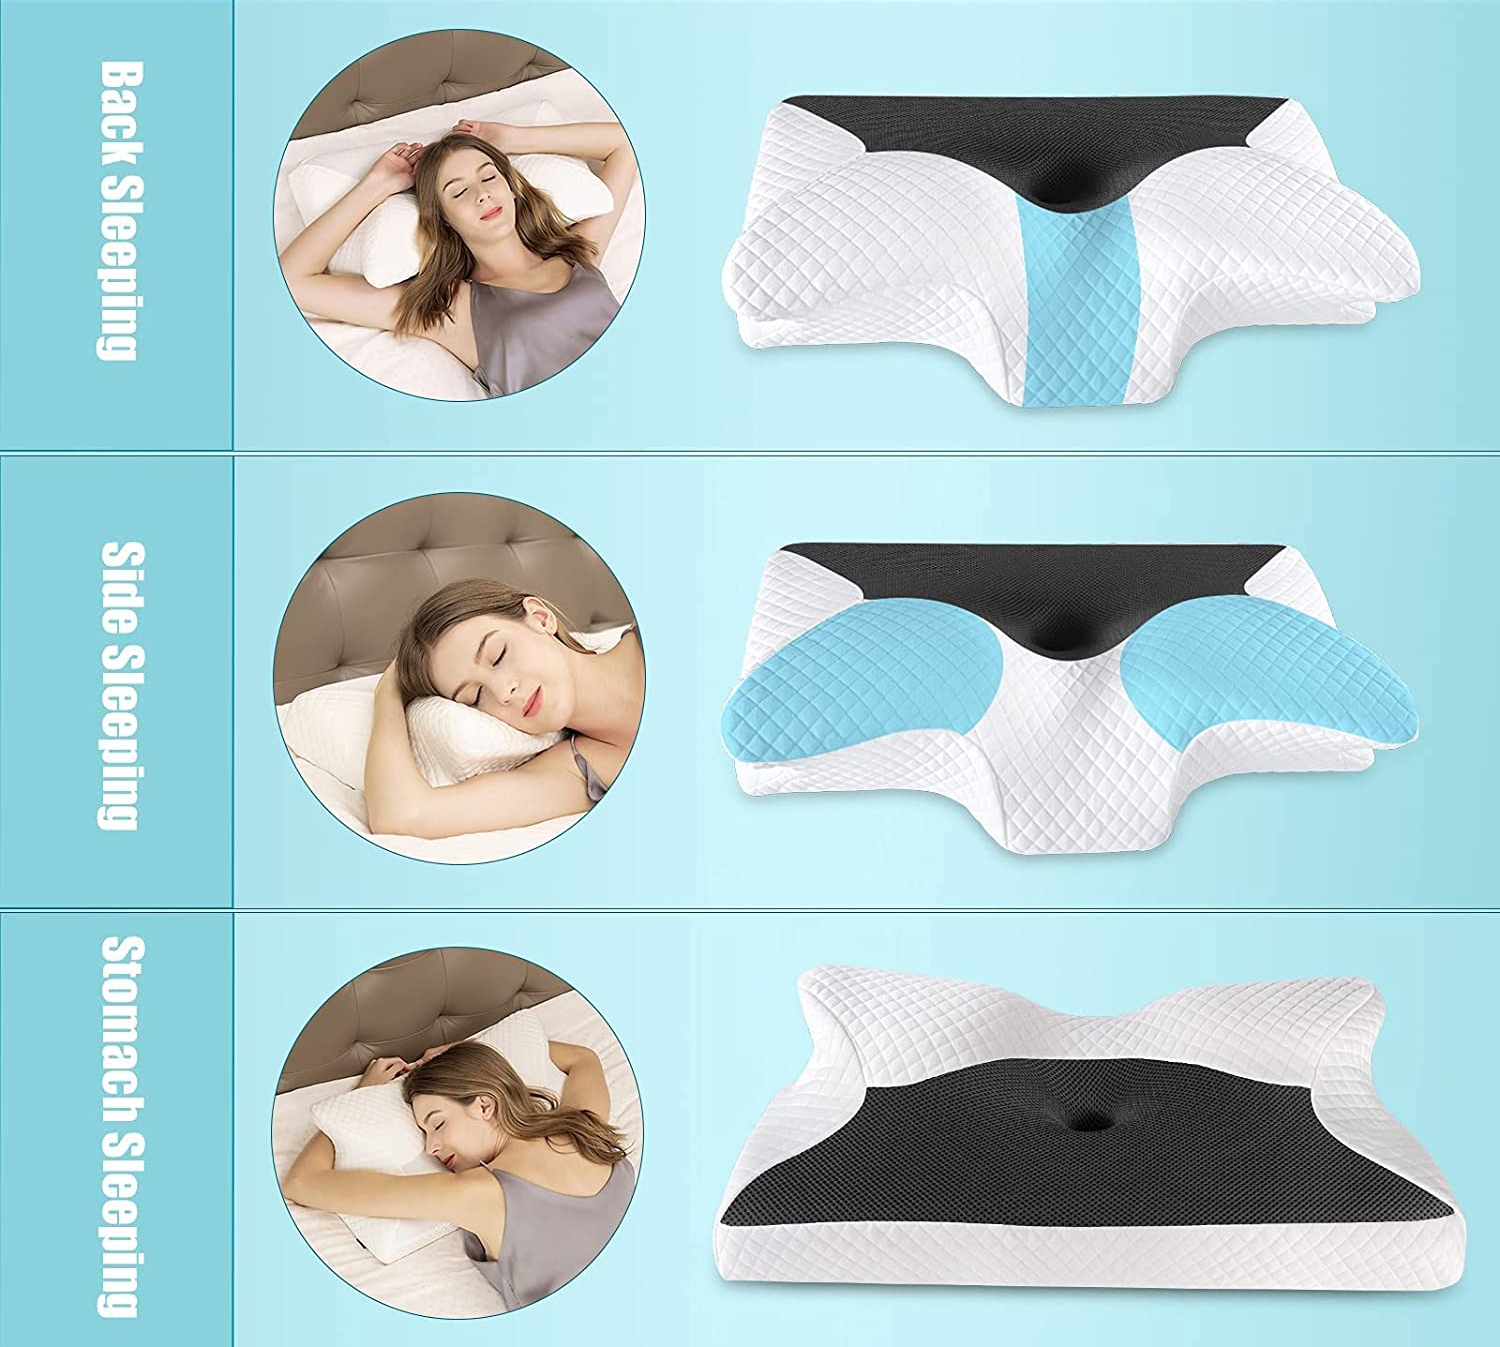 an image showing the different ways the pillow can be used